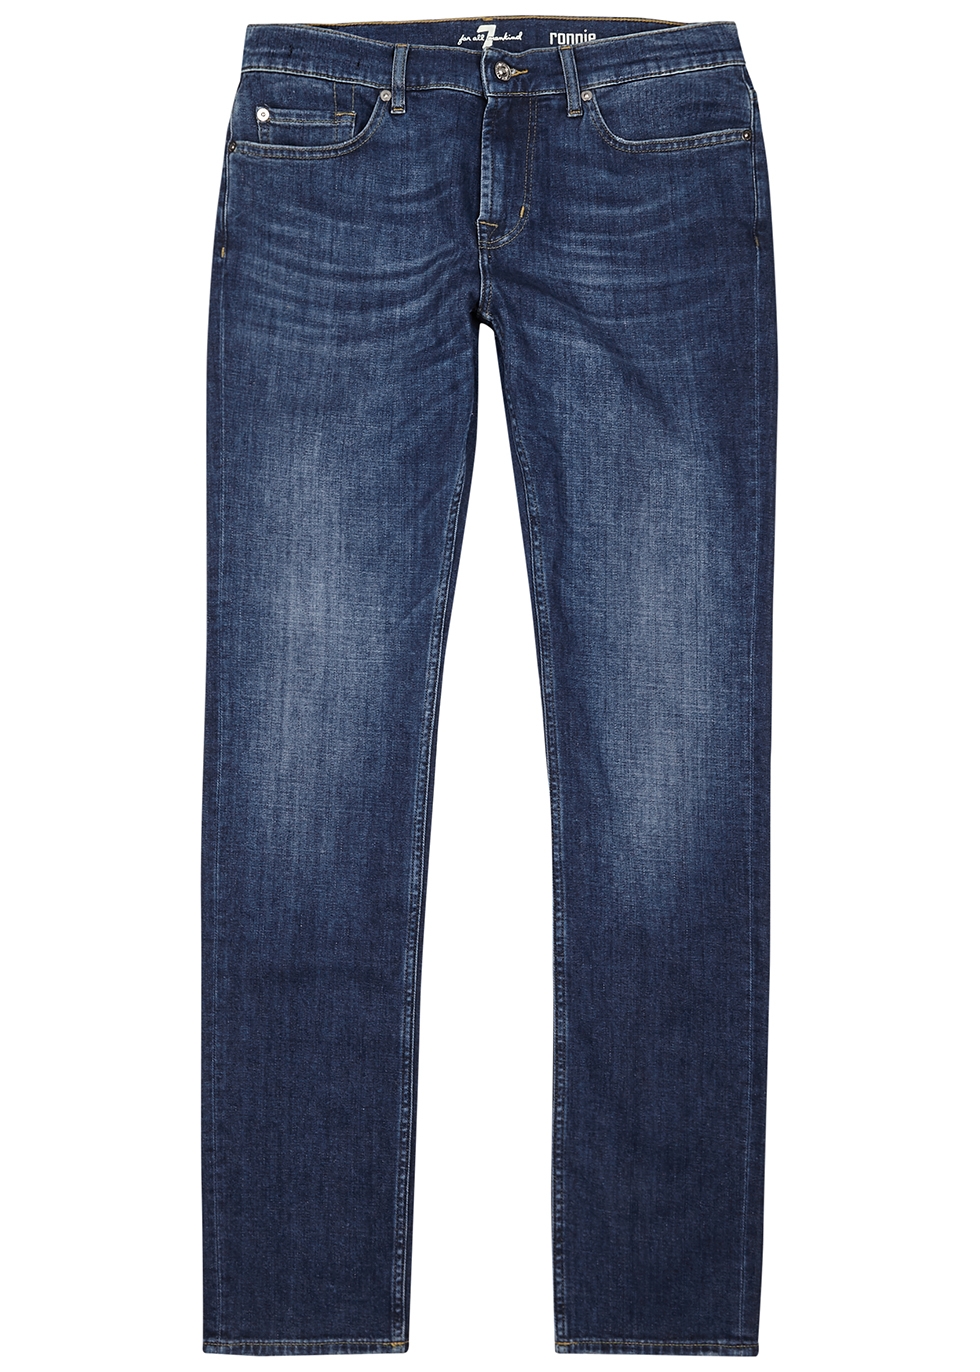 7 For All Mankind Ronnie blue skinny jeans - Harvey Nichols